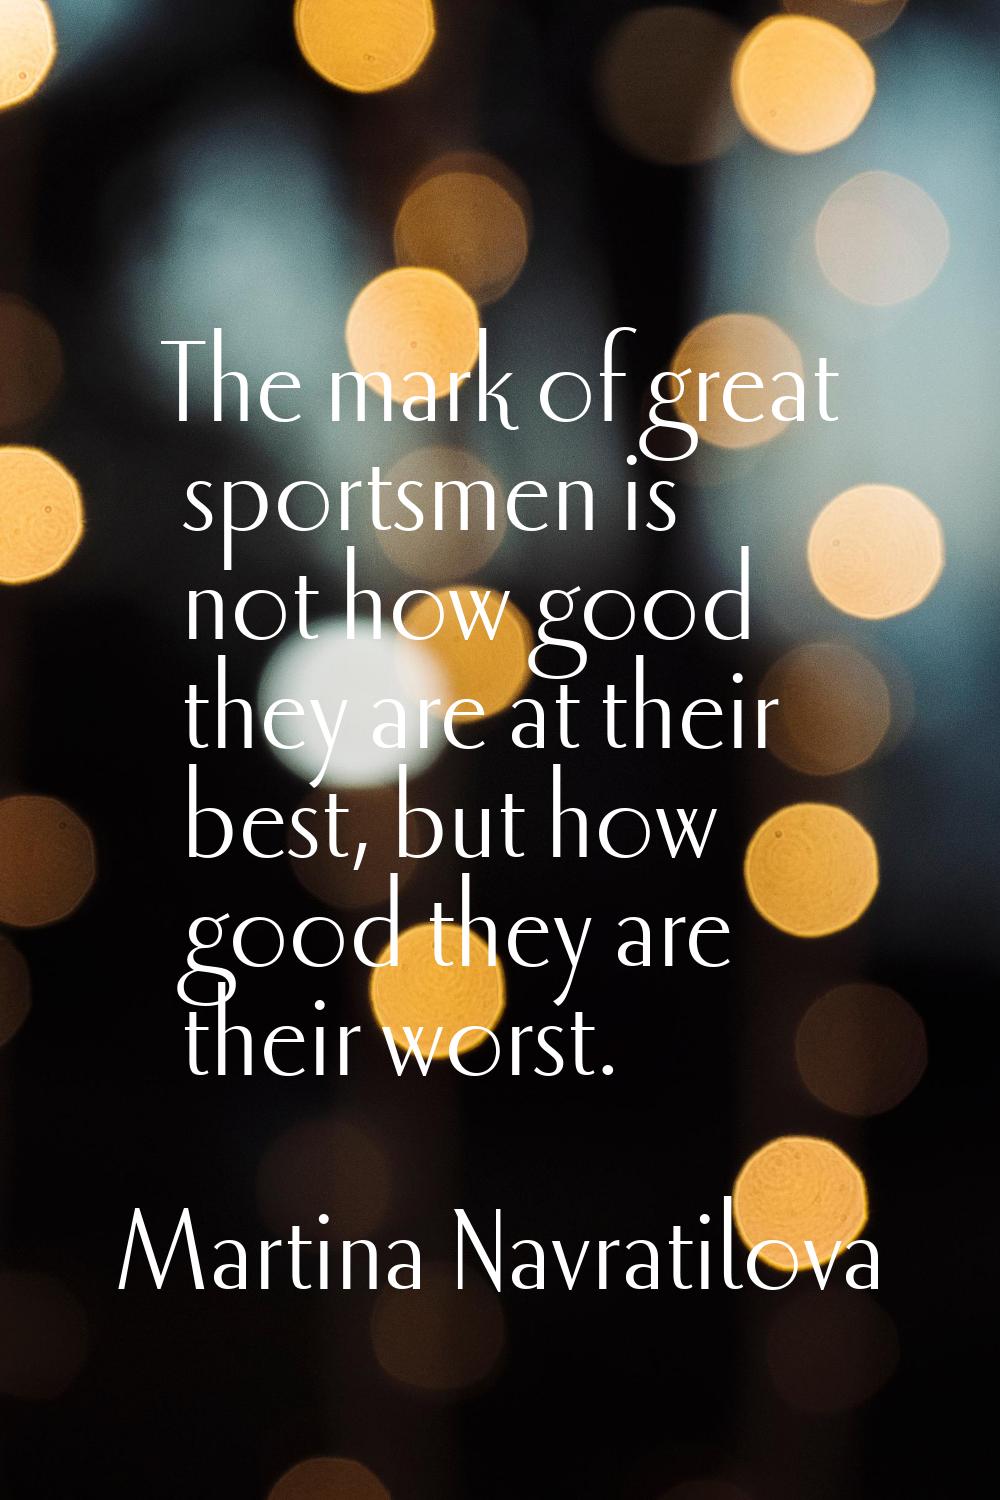 The mark of great sportsmen is not how good they are at their best, but how good they are their wor